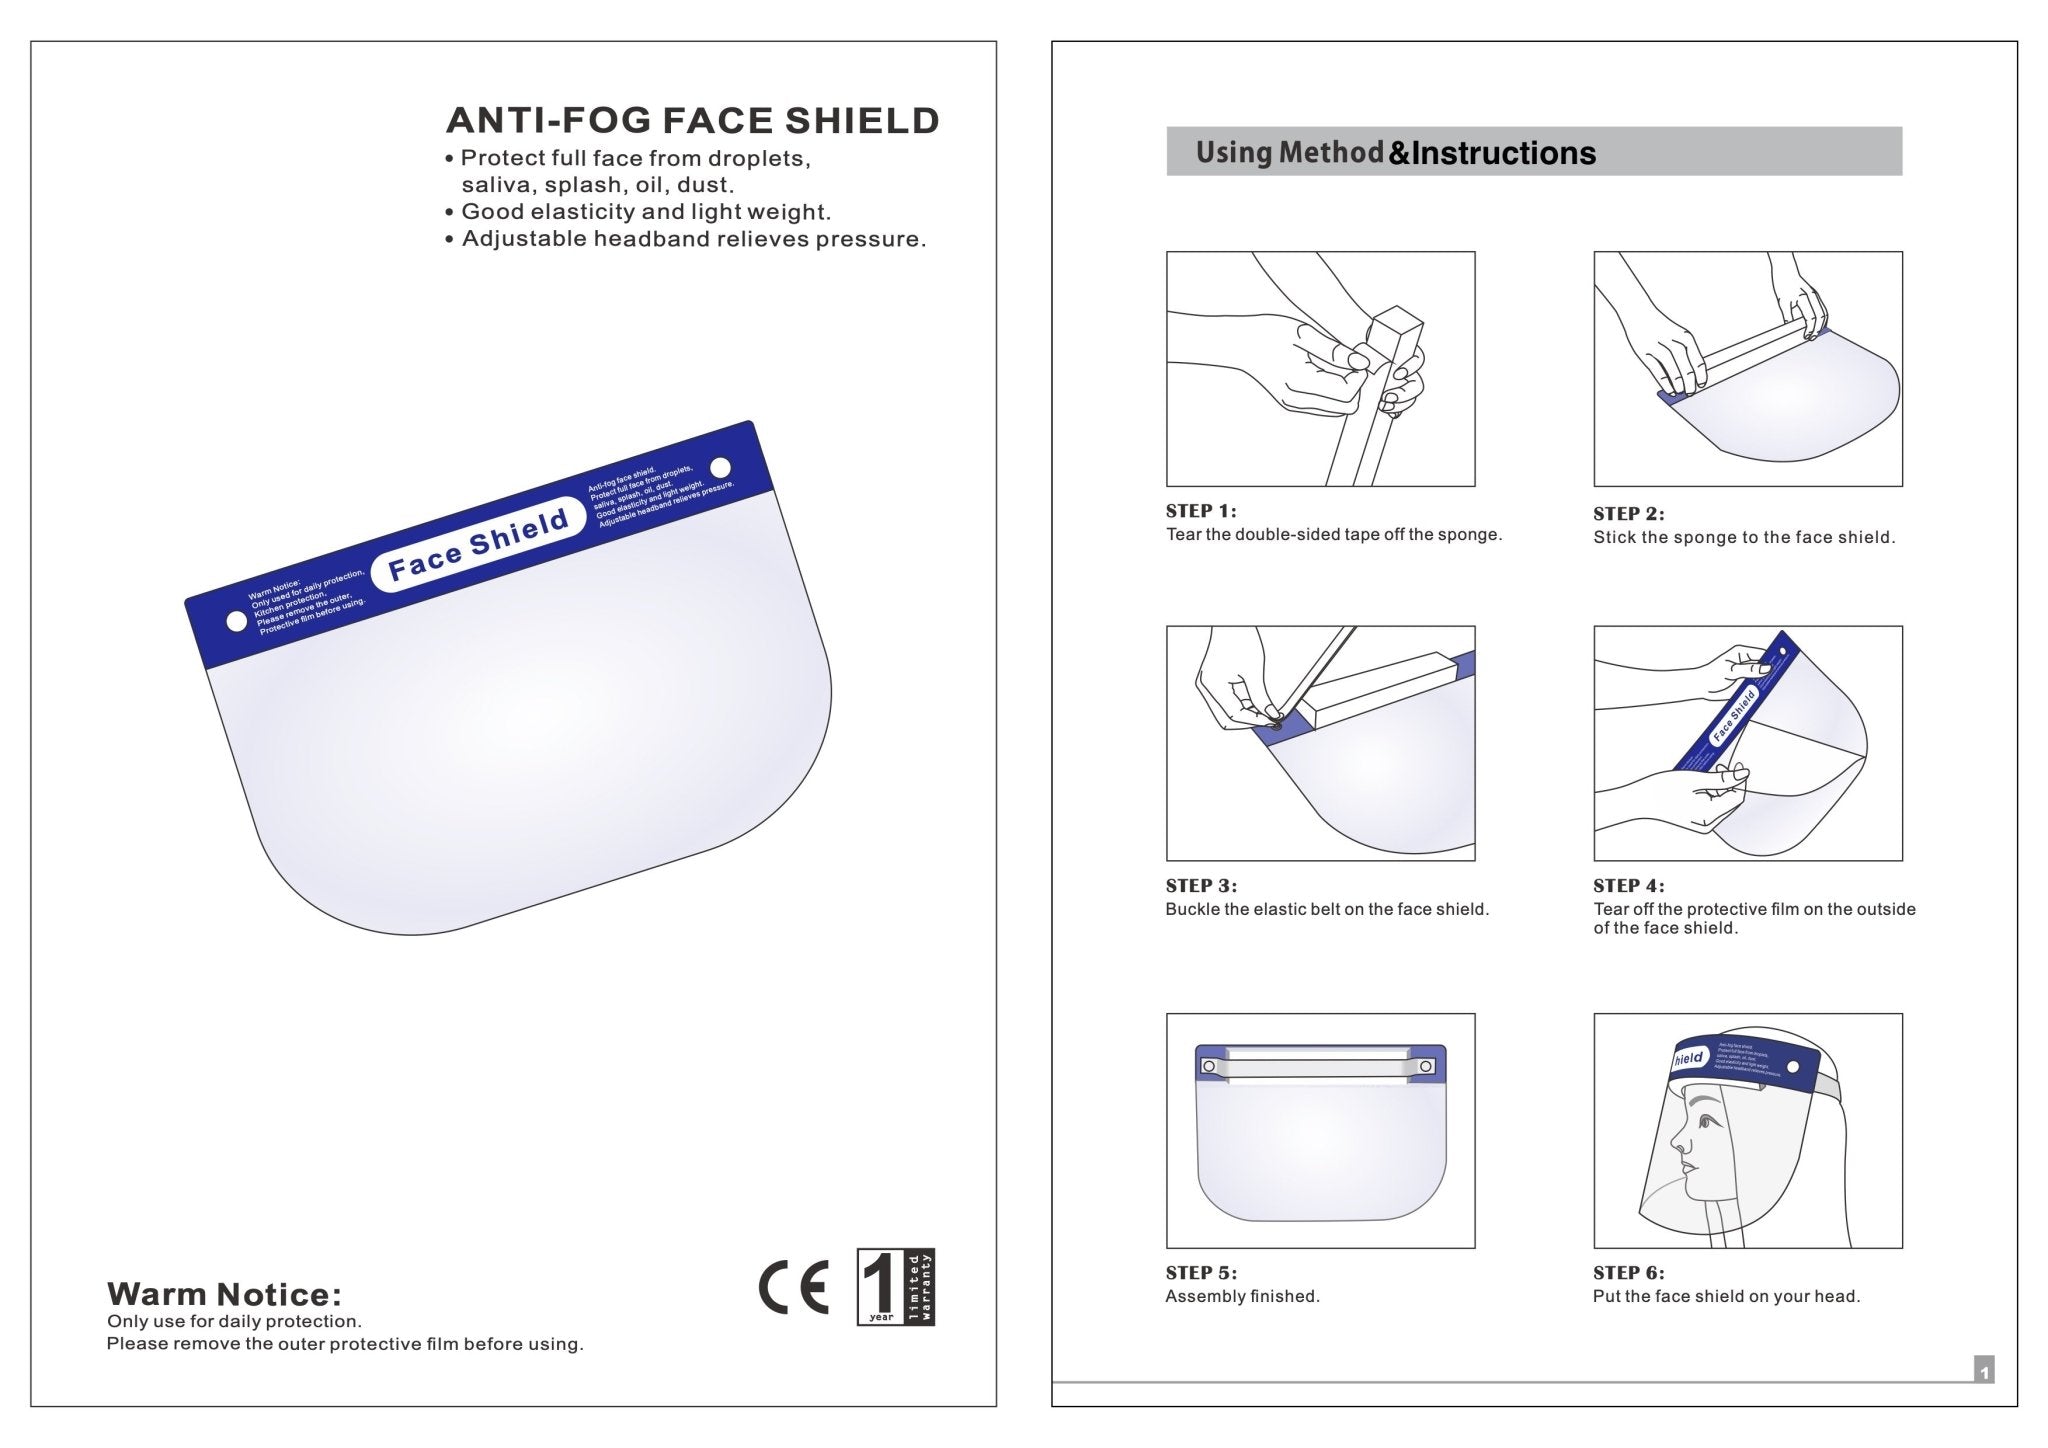 Face Shield - Beauty Hair Products Ltd